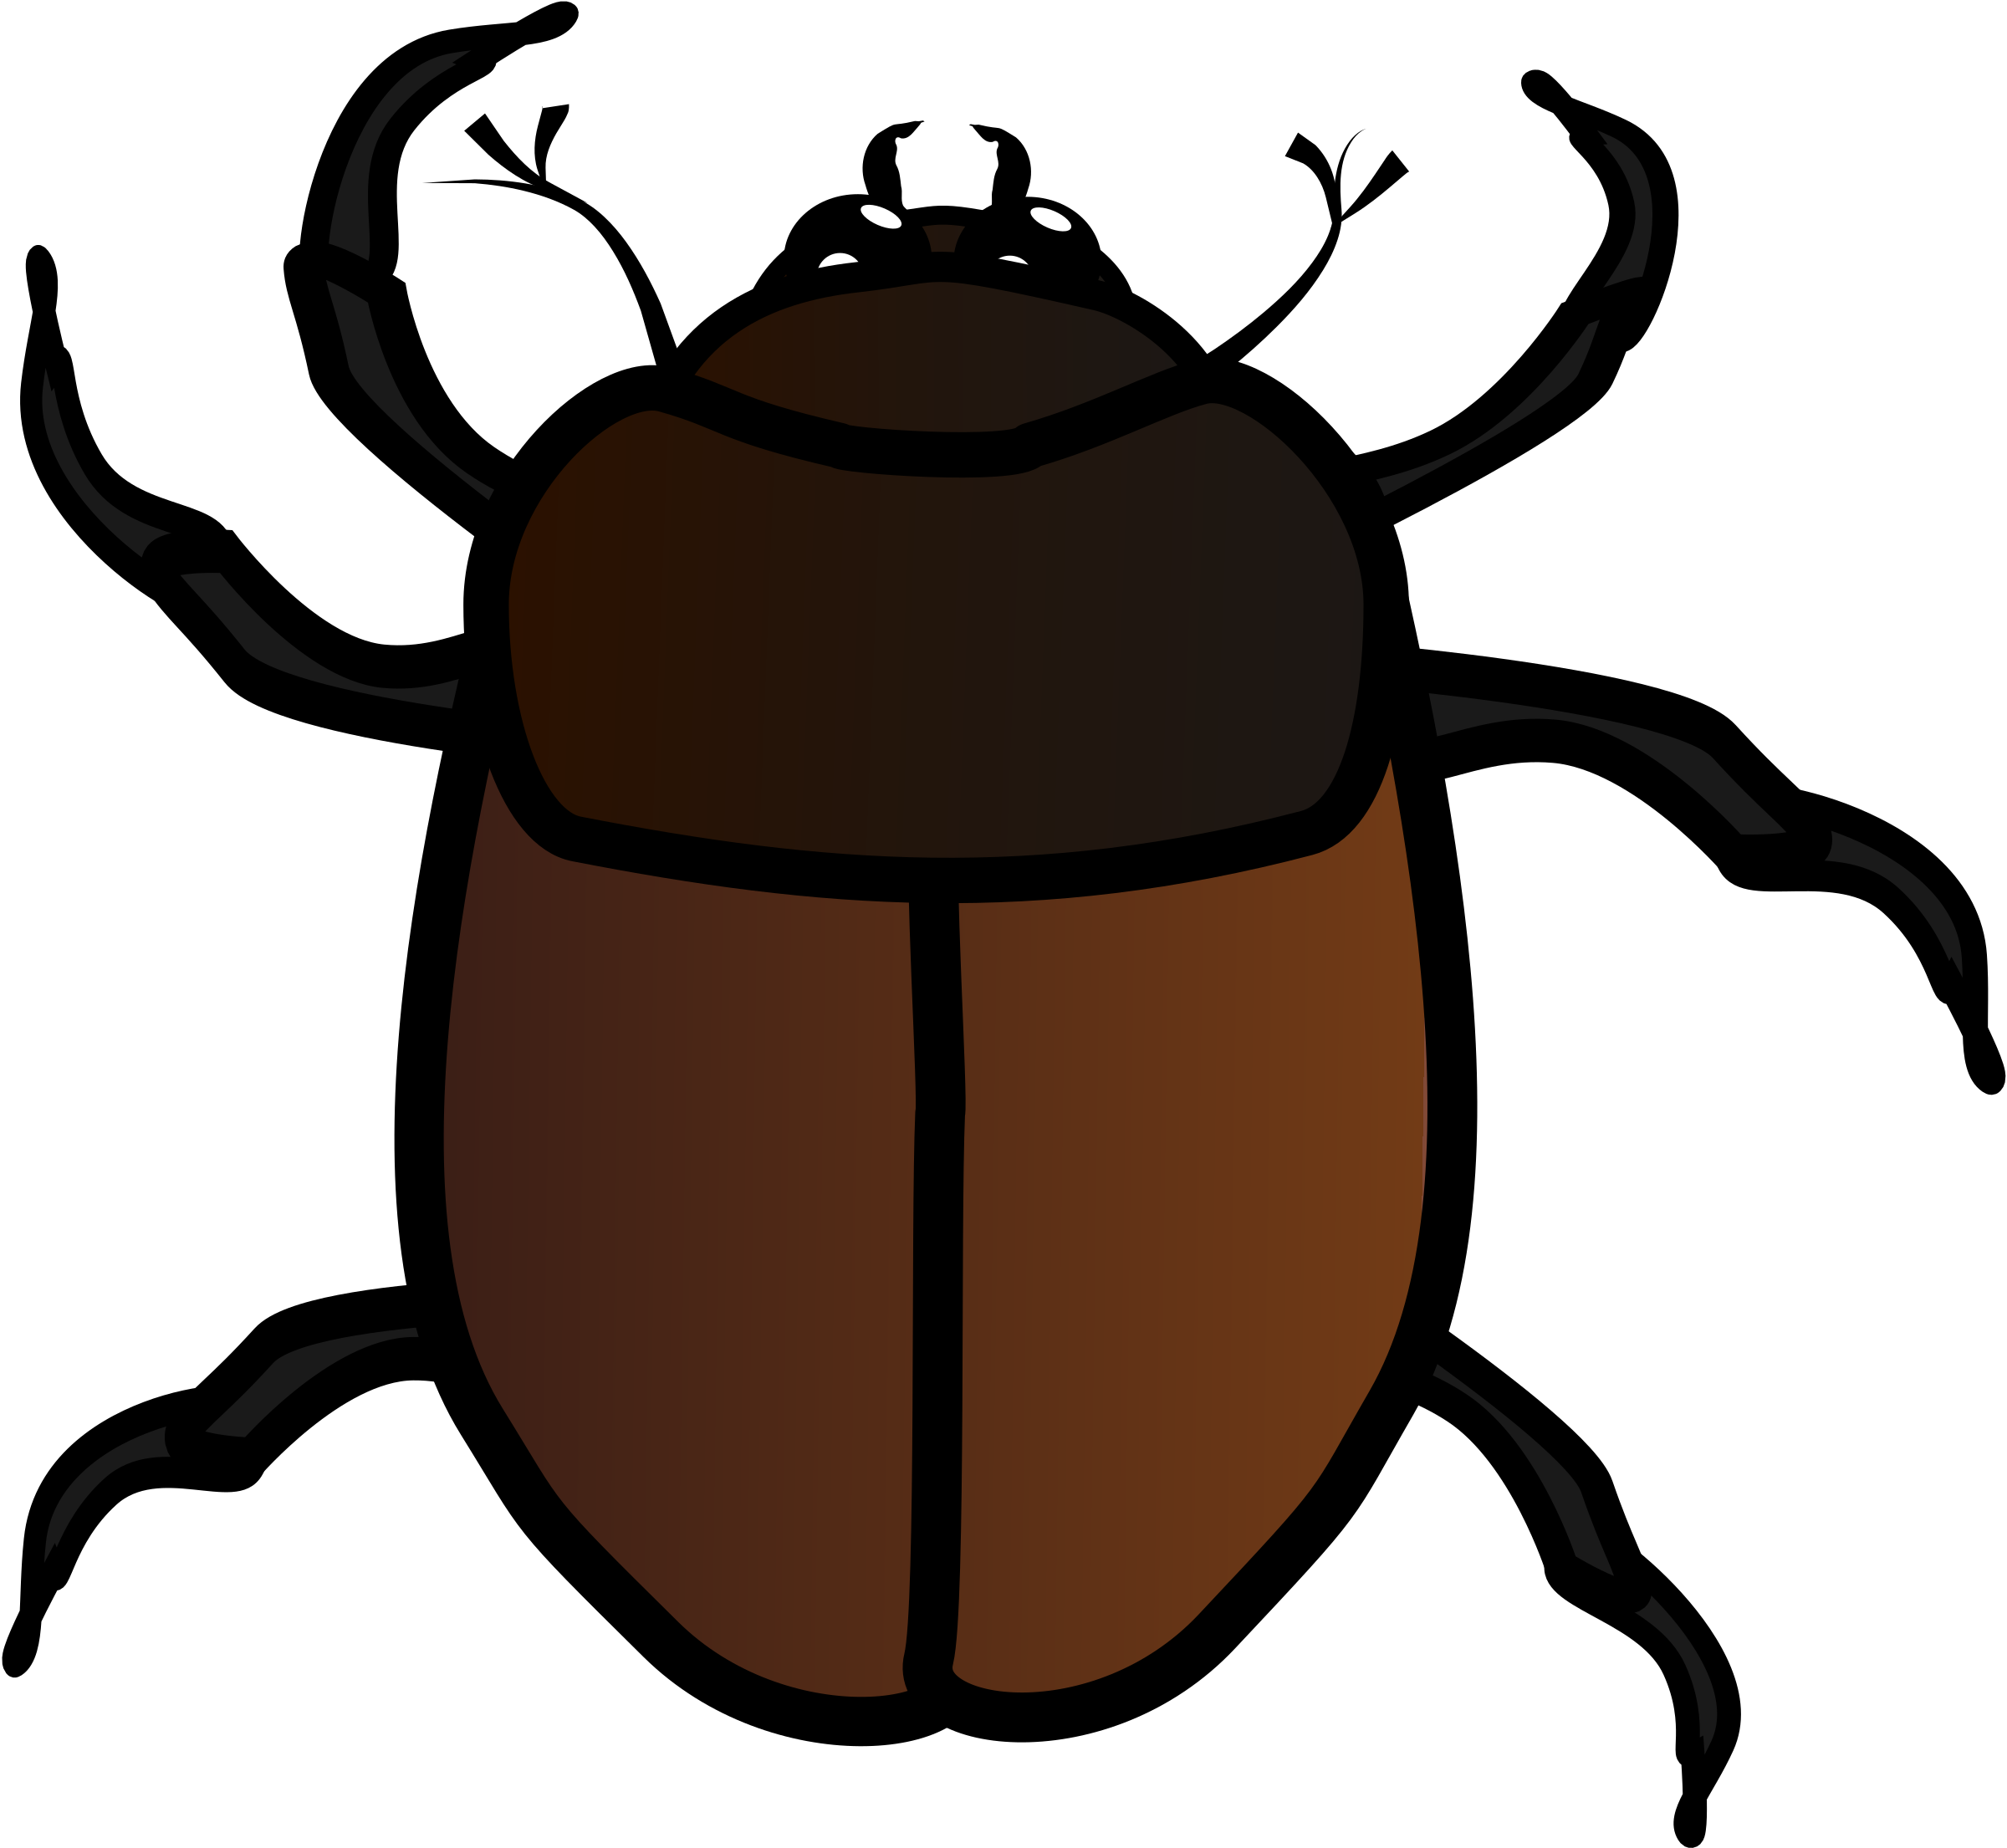 Bug cute insect clipart kid - Cliparting.com